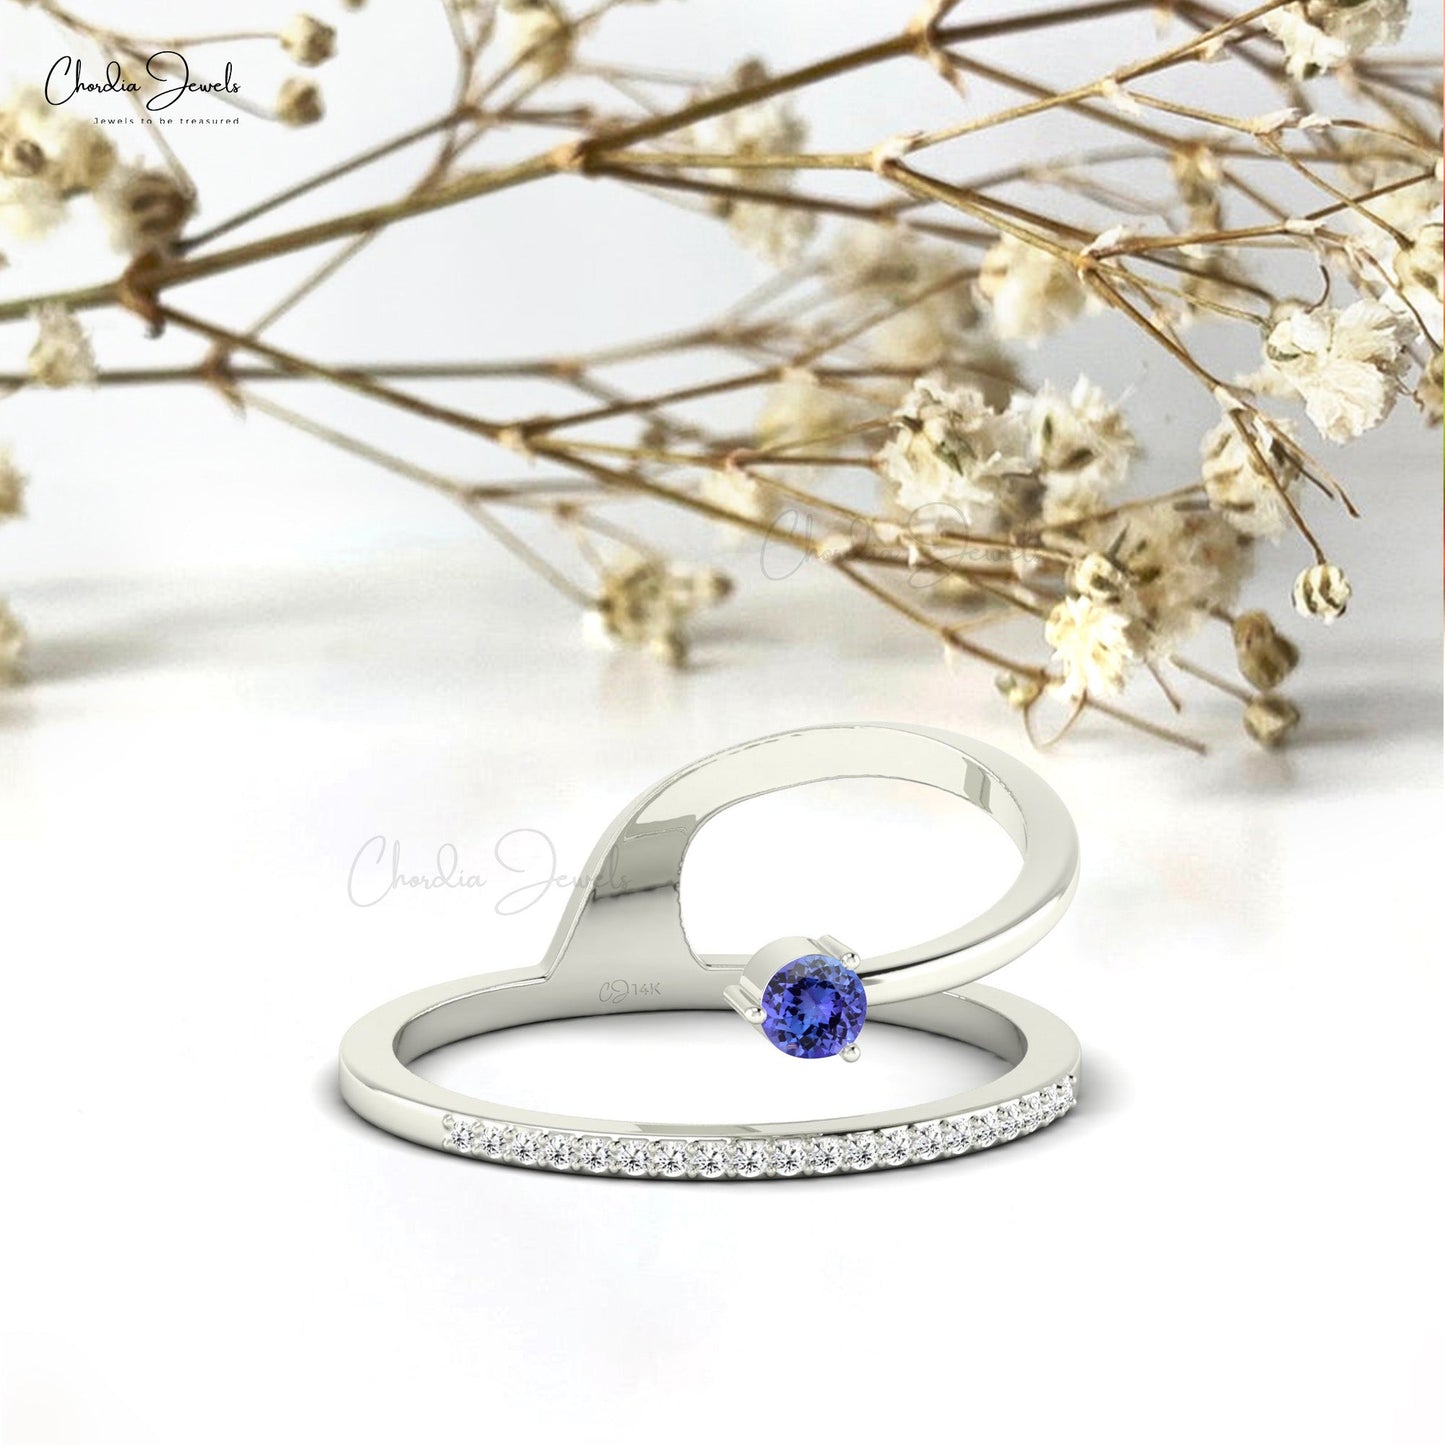 Dainty Stackable Ring With Genuine Tanzanite 14K Solid Gold Diamond Accents Curved Ring